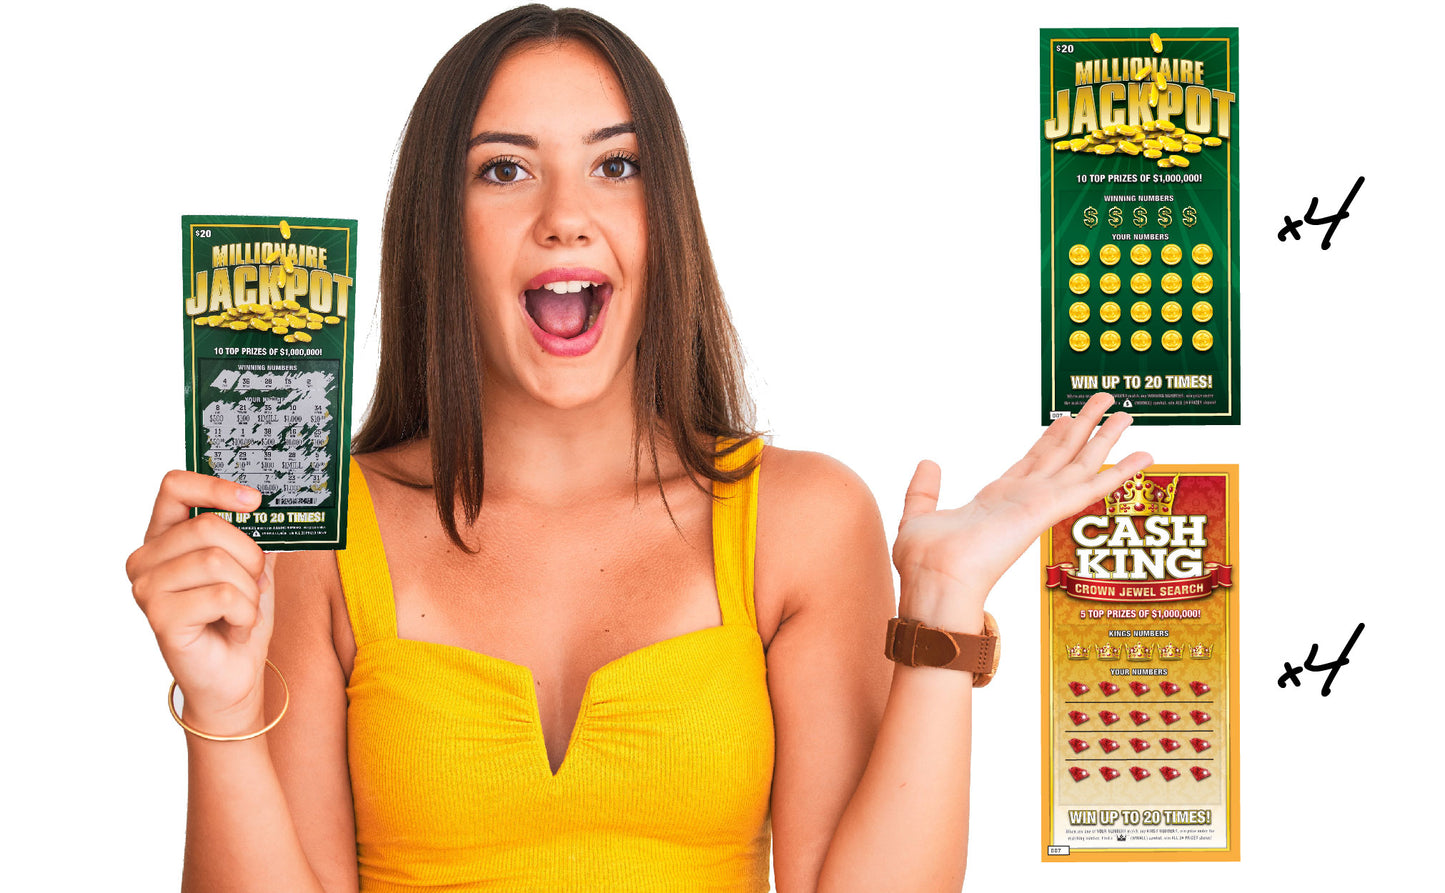 Fake Lottery Tickets and Scratch Off Cards that Look Real